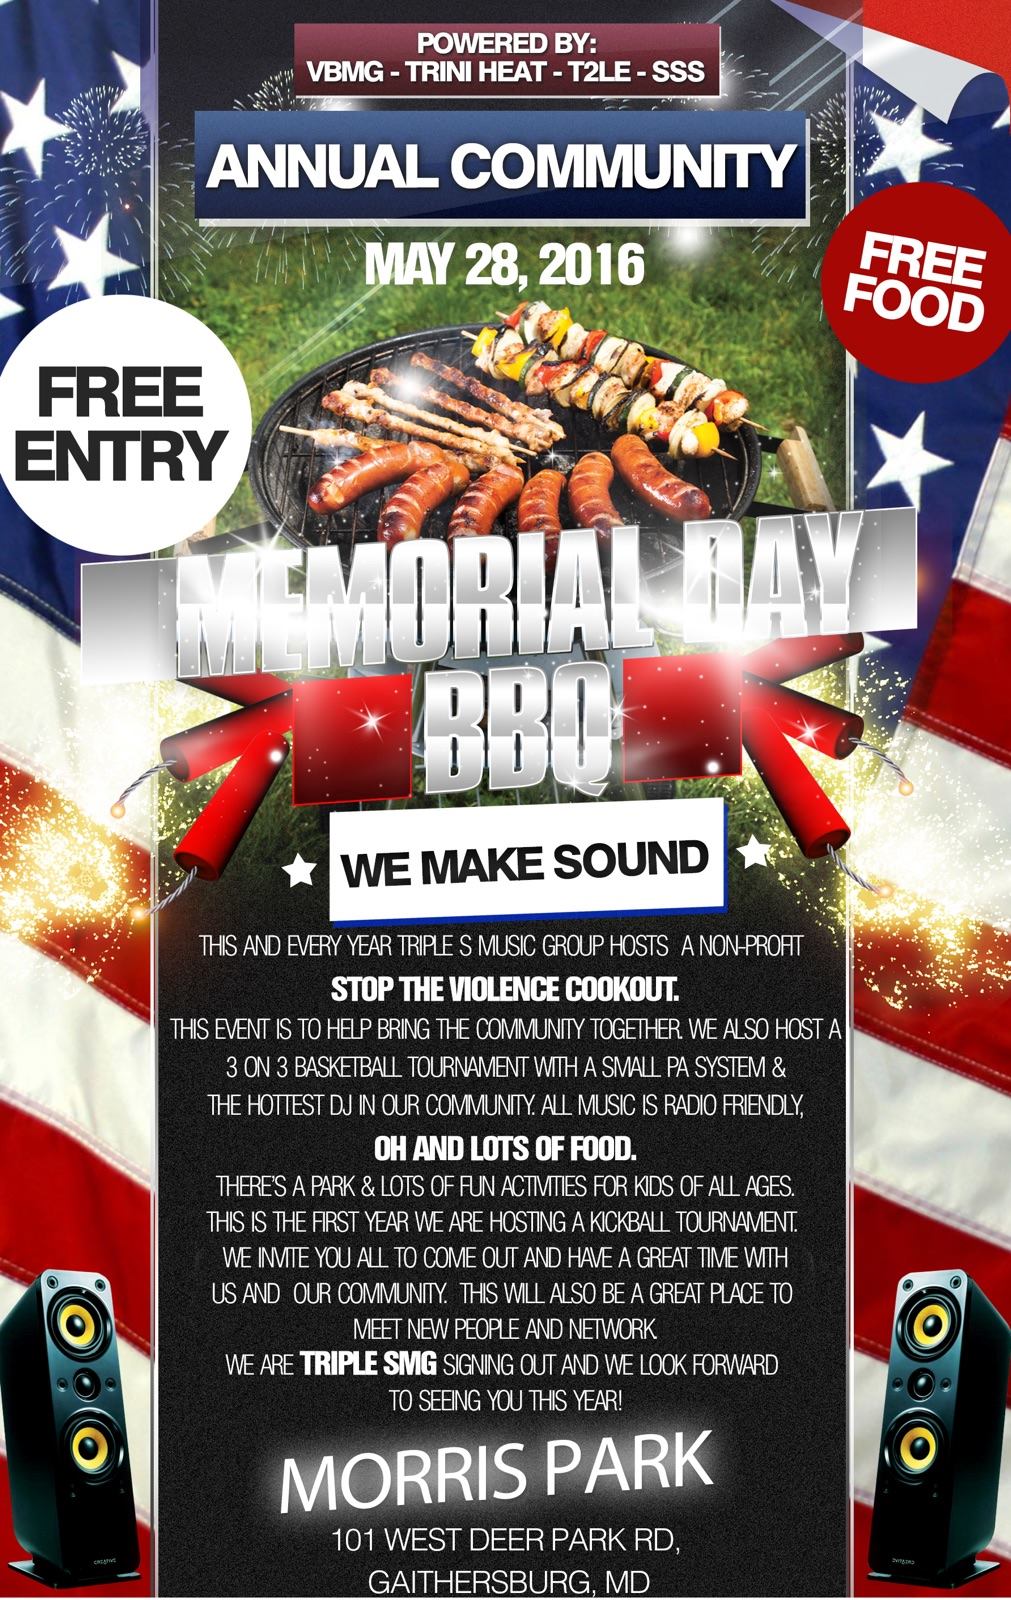 [Event] Stop the Violence Cookout with Triple SMG (Memorial Day)